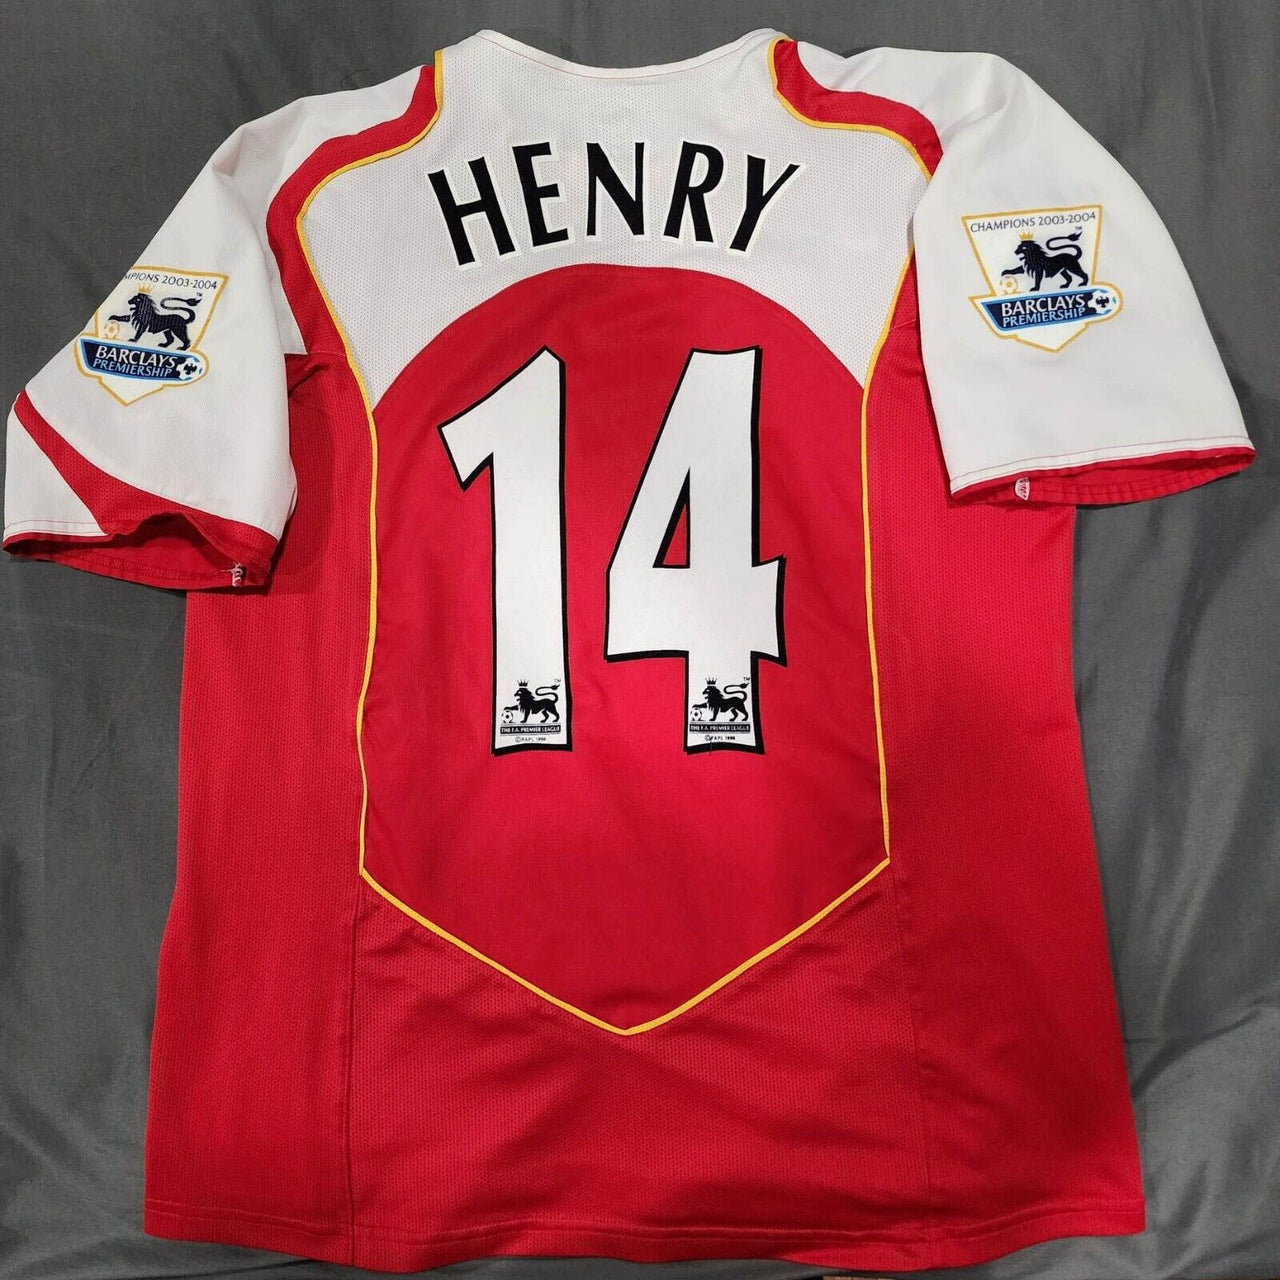 Thierry Henry #14 2004/2005 Arsenal home vintage football short slave jersey